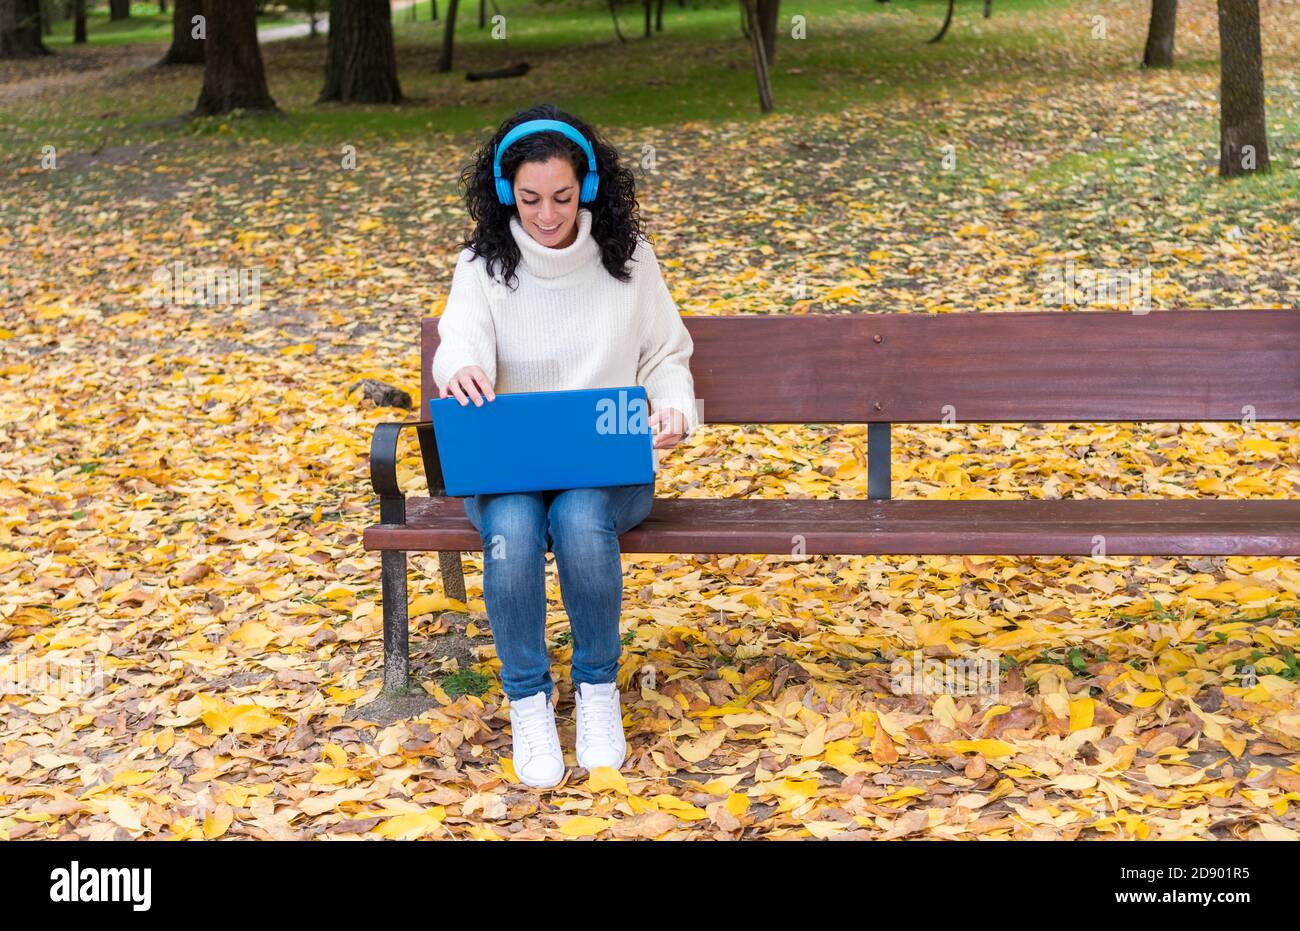 young woman with curly hair sitting on a bench working with laptop and blue wireless headphones while smiling in autumn with leaves falling from the t Stock Photo